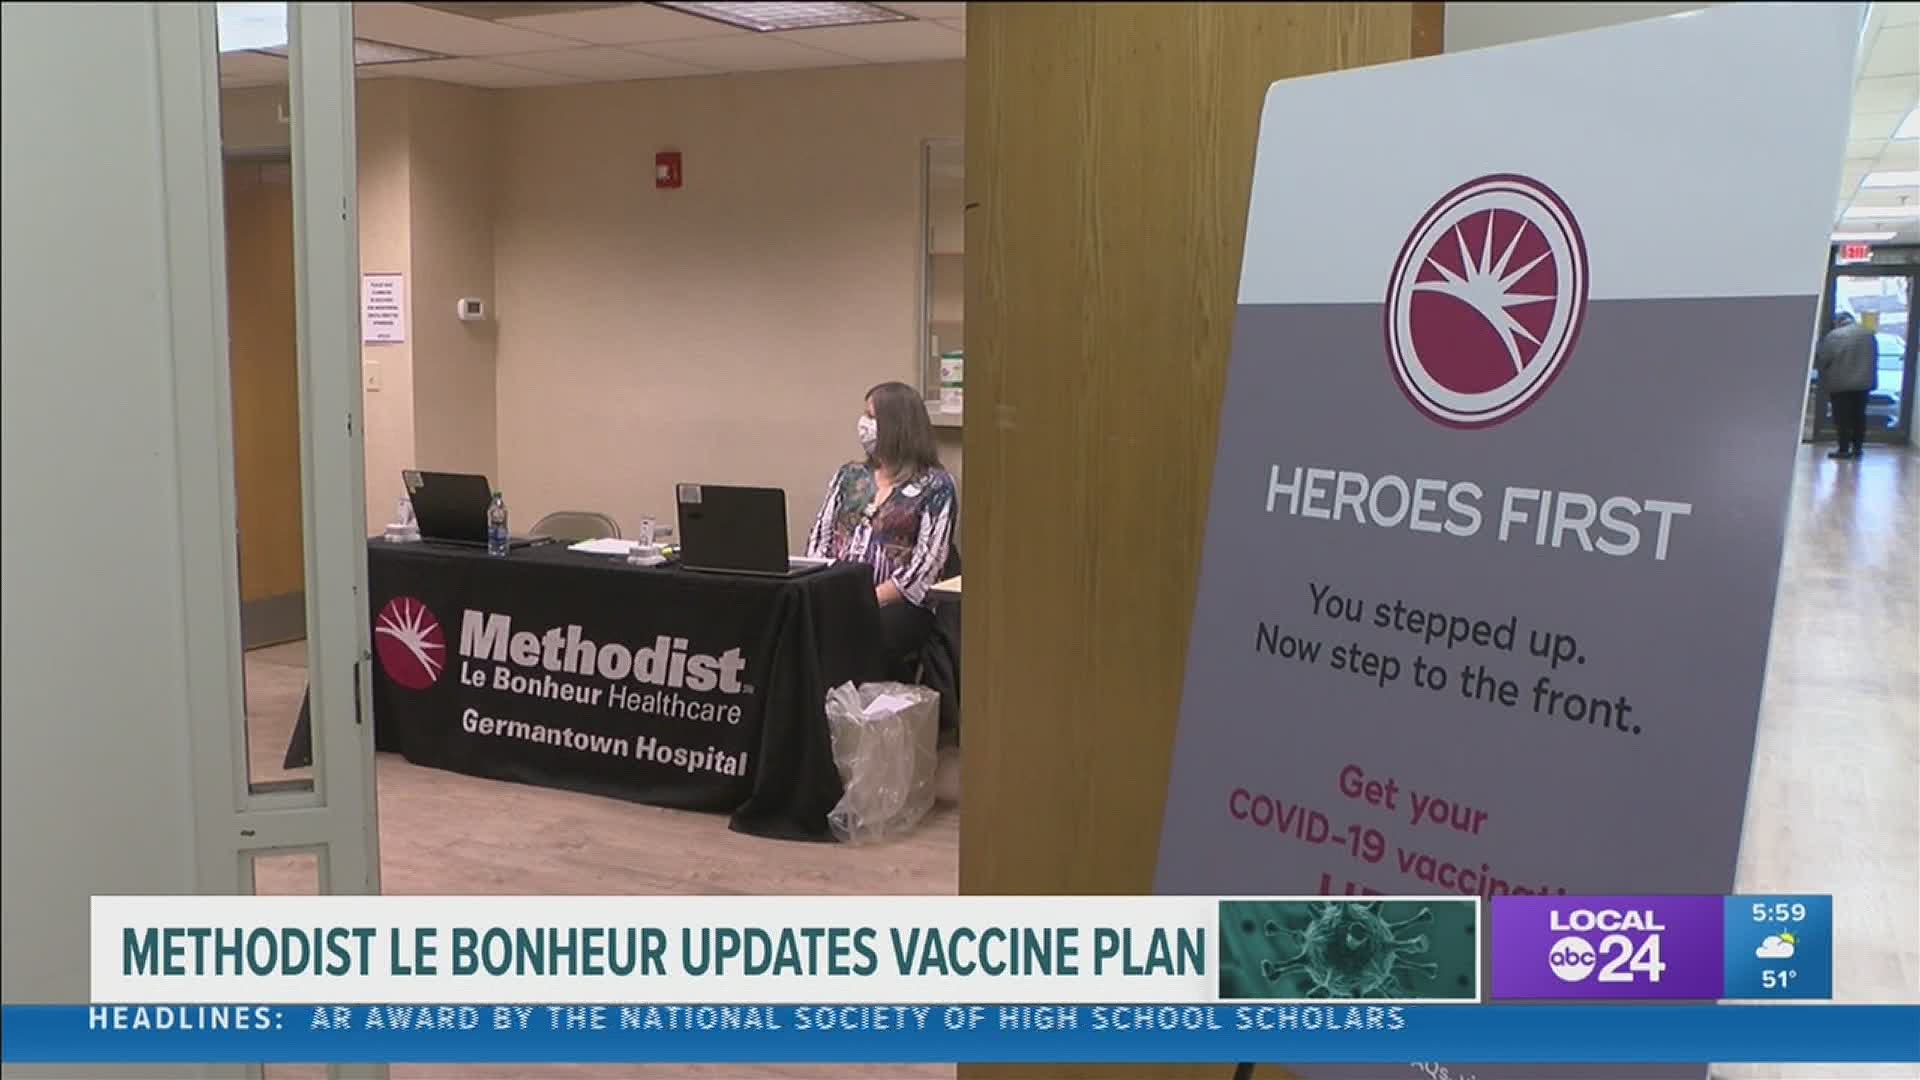 COVID-19 vaccinations will be spread out over a year, and those 65 and older may not be eligible for a shot anytime soon.